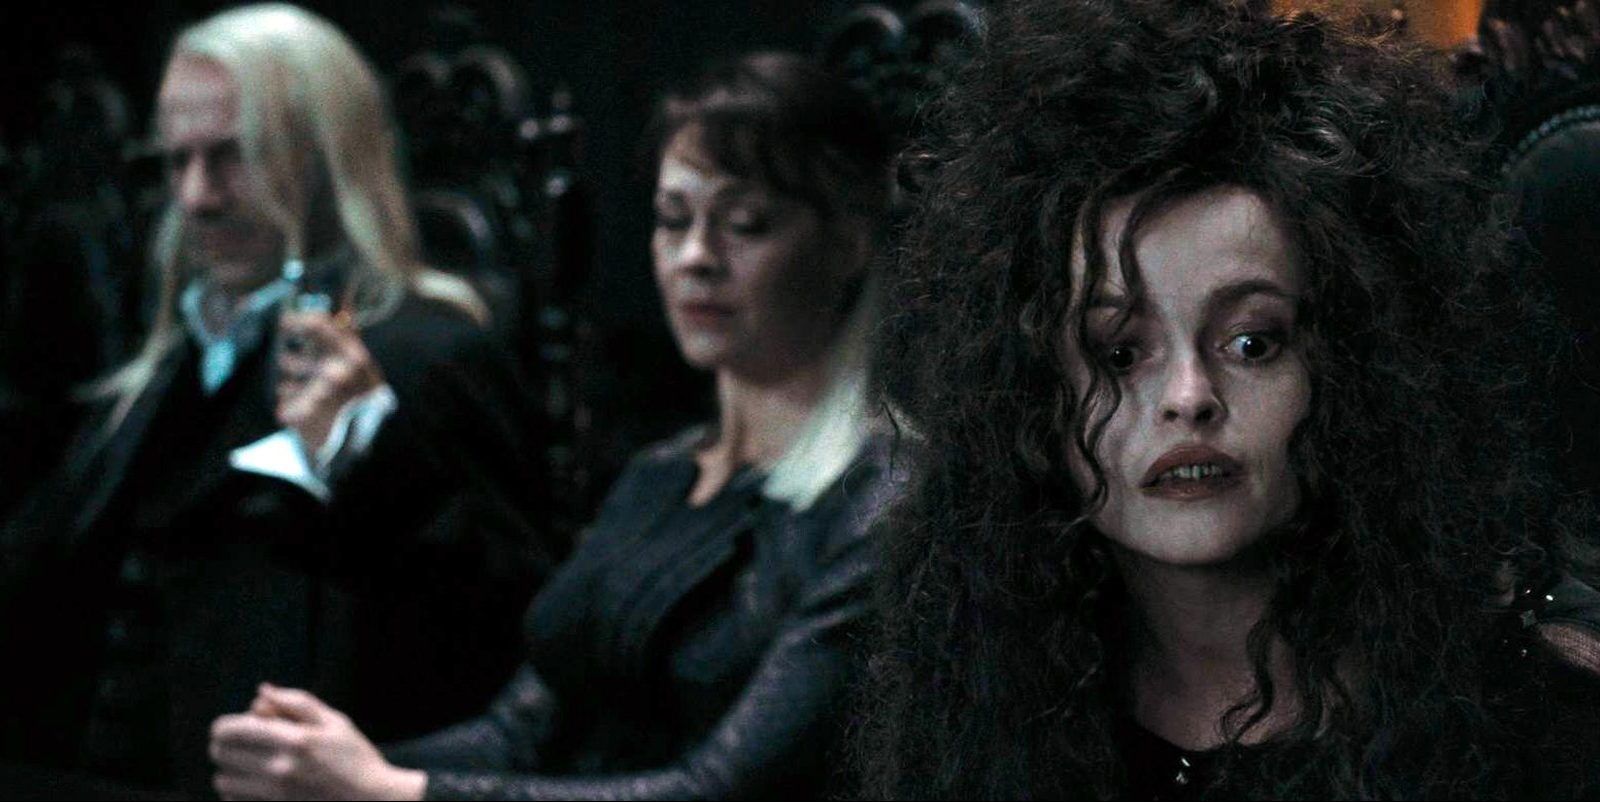 Bellatrix looking interested in front of Lucius and Narcissa